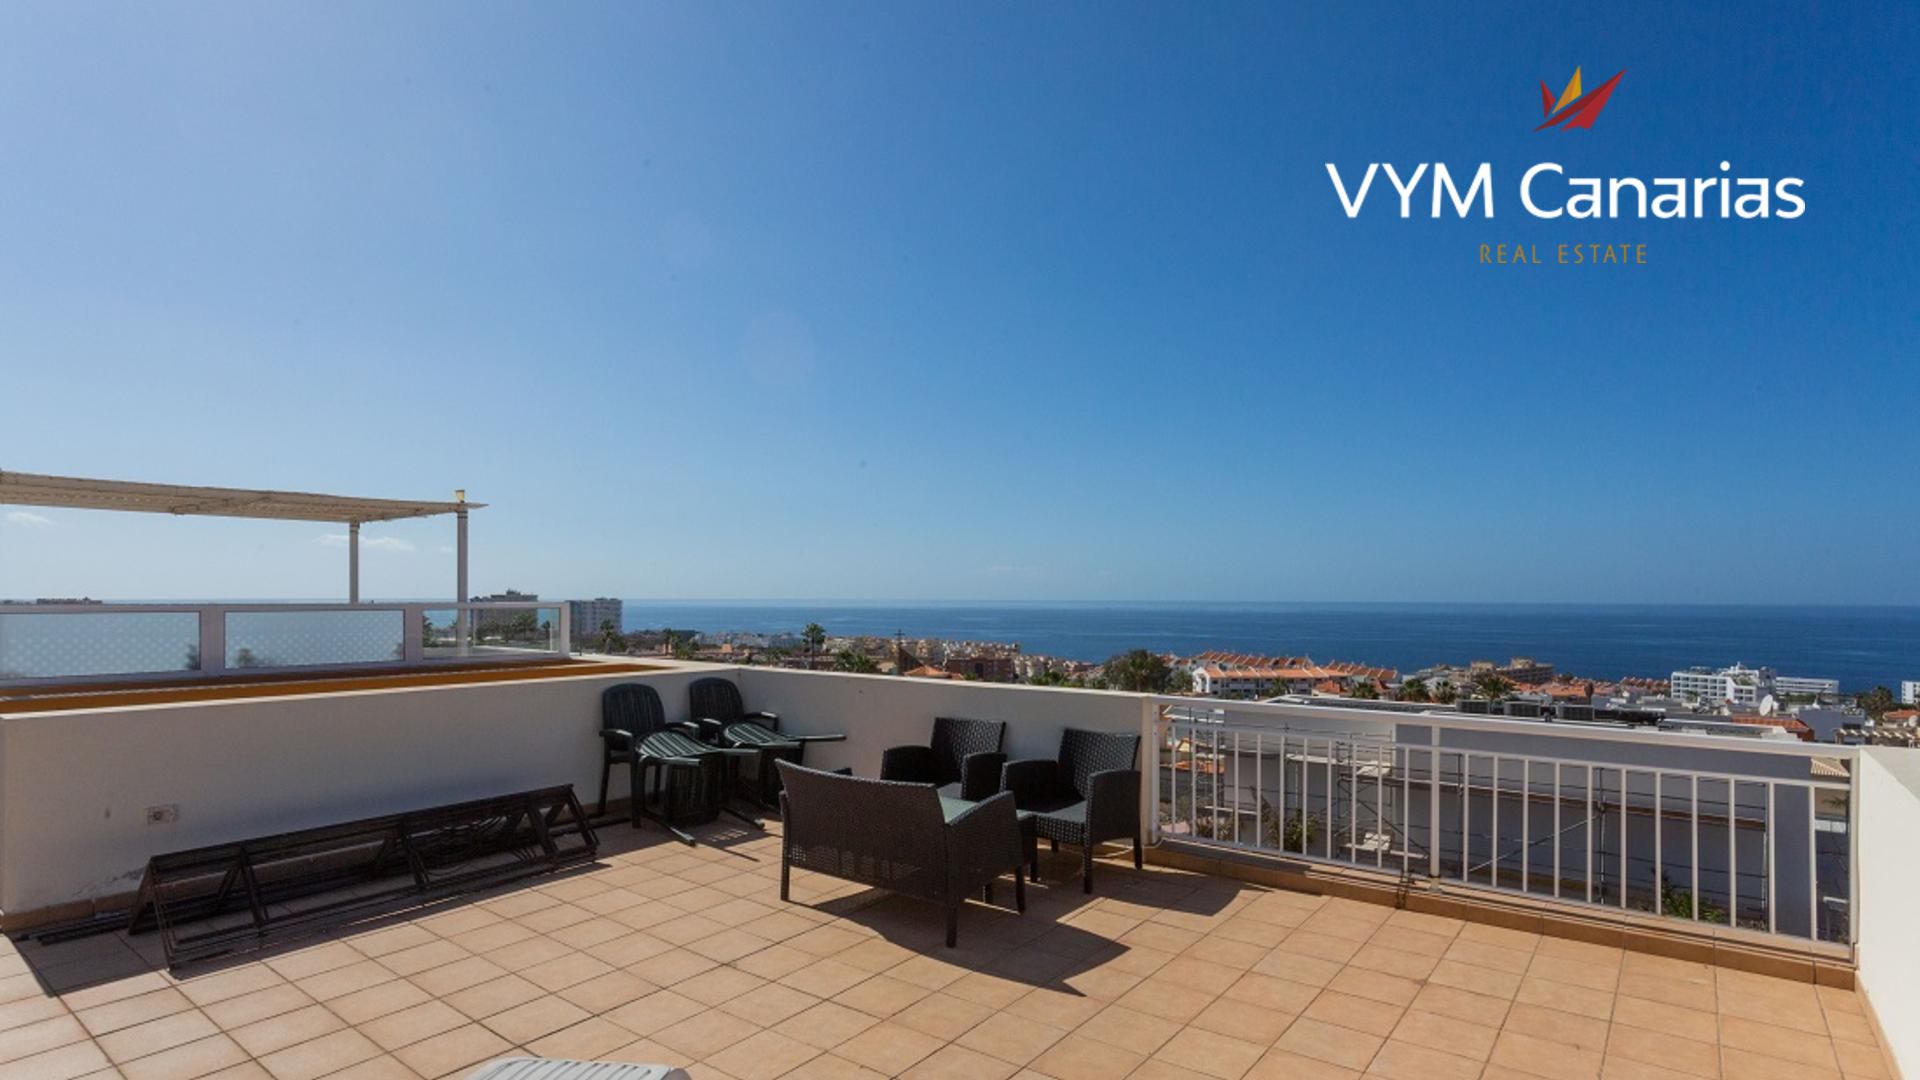 Penthouse in Callao Salvaje marketed by Vym Canarias